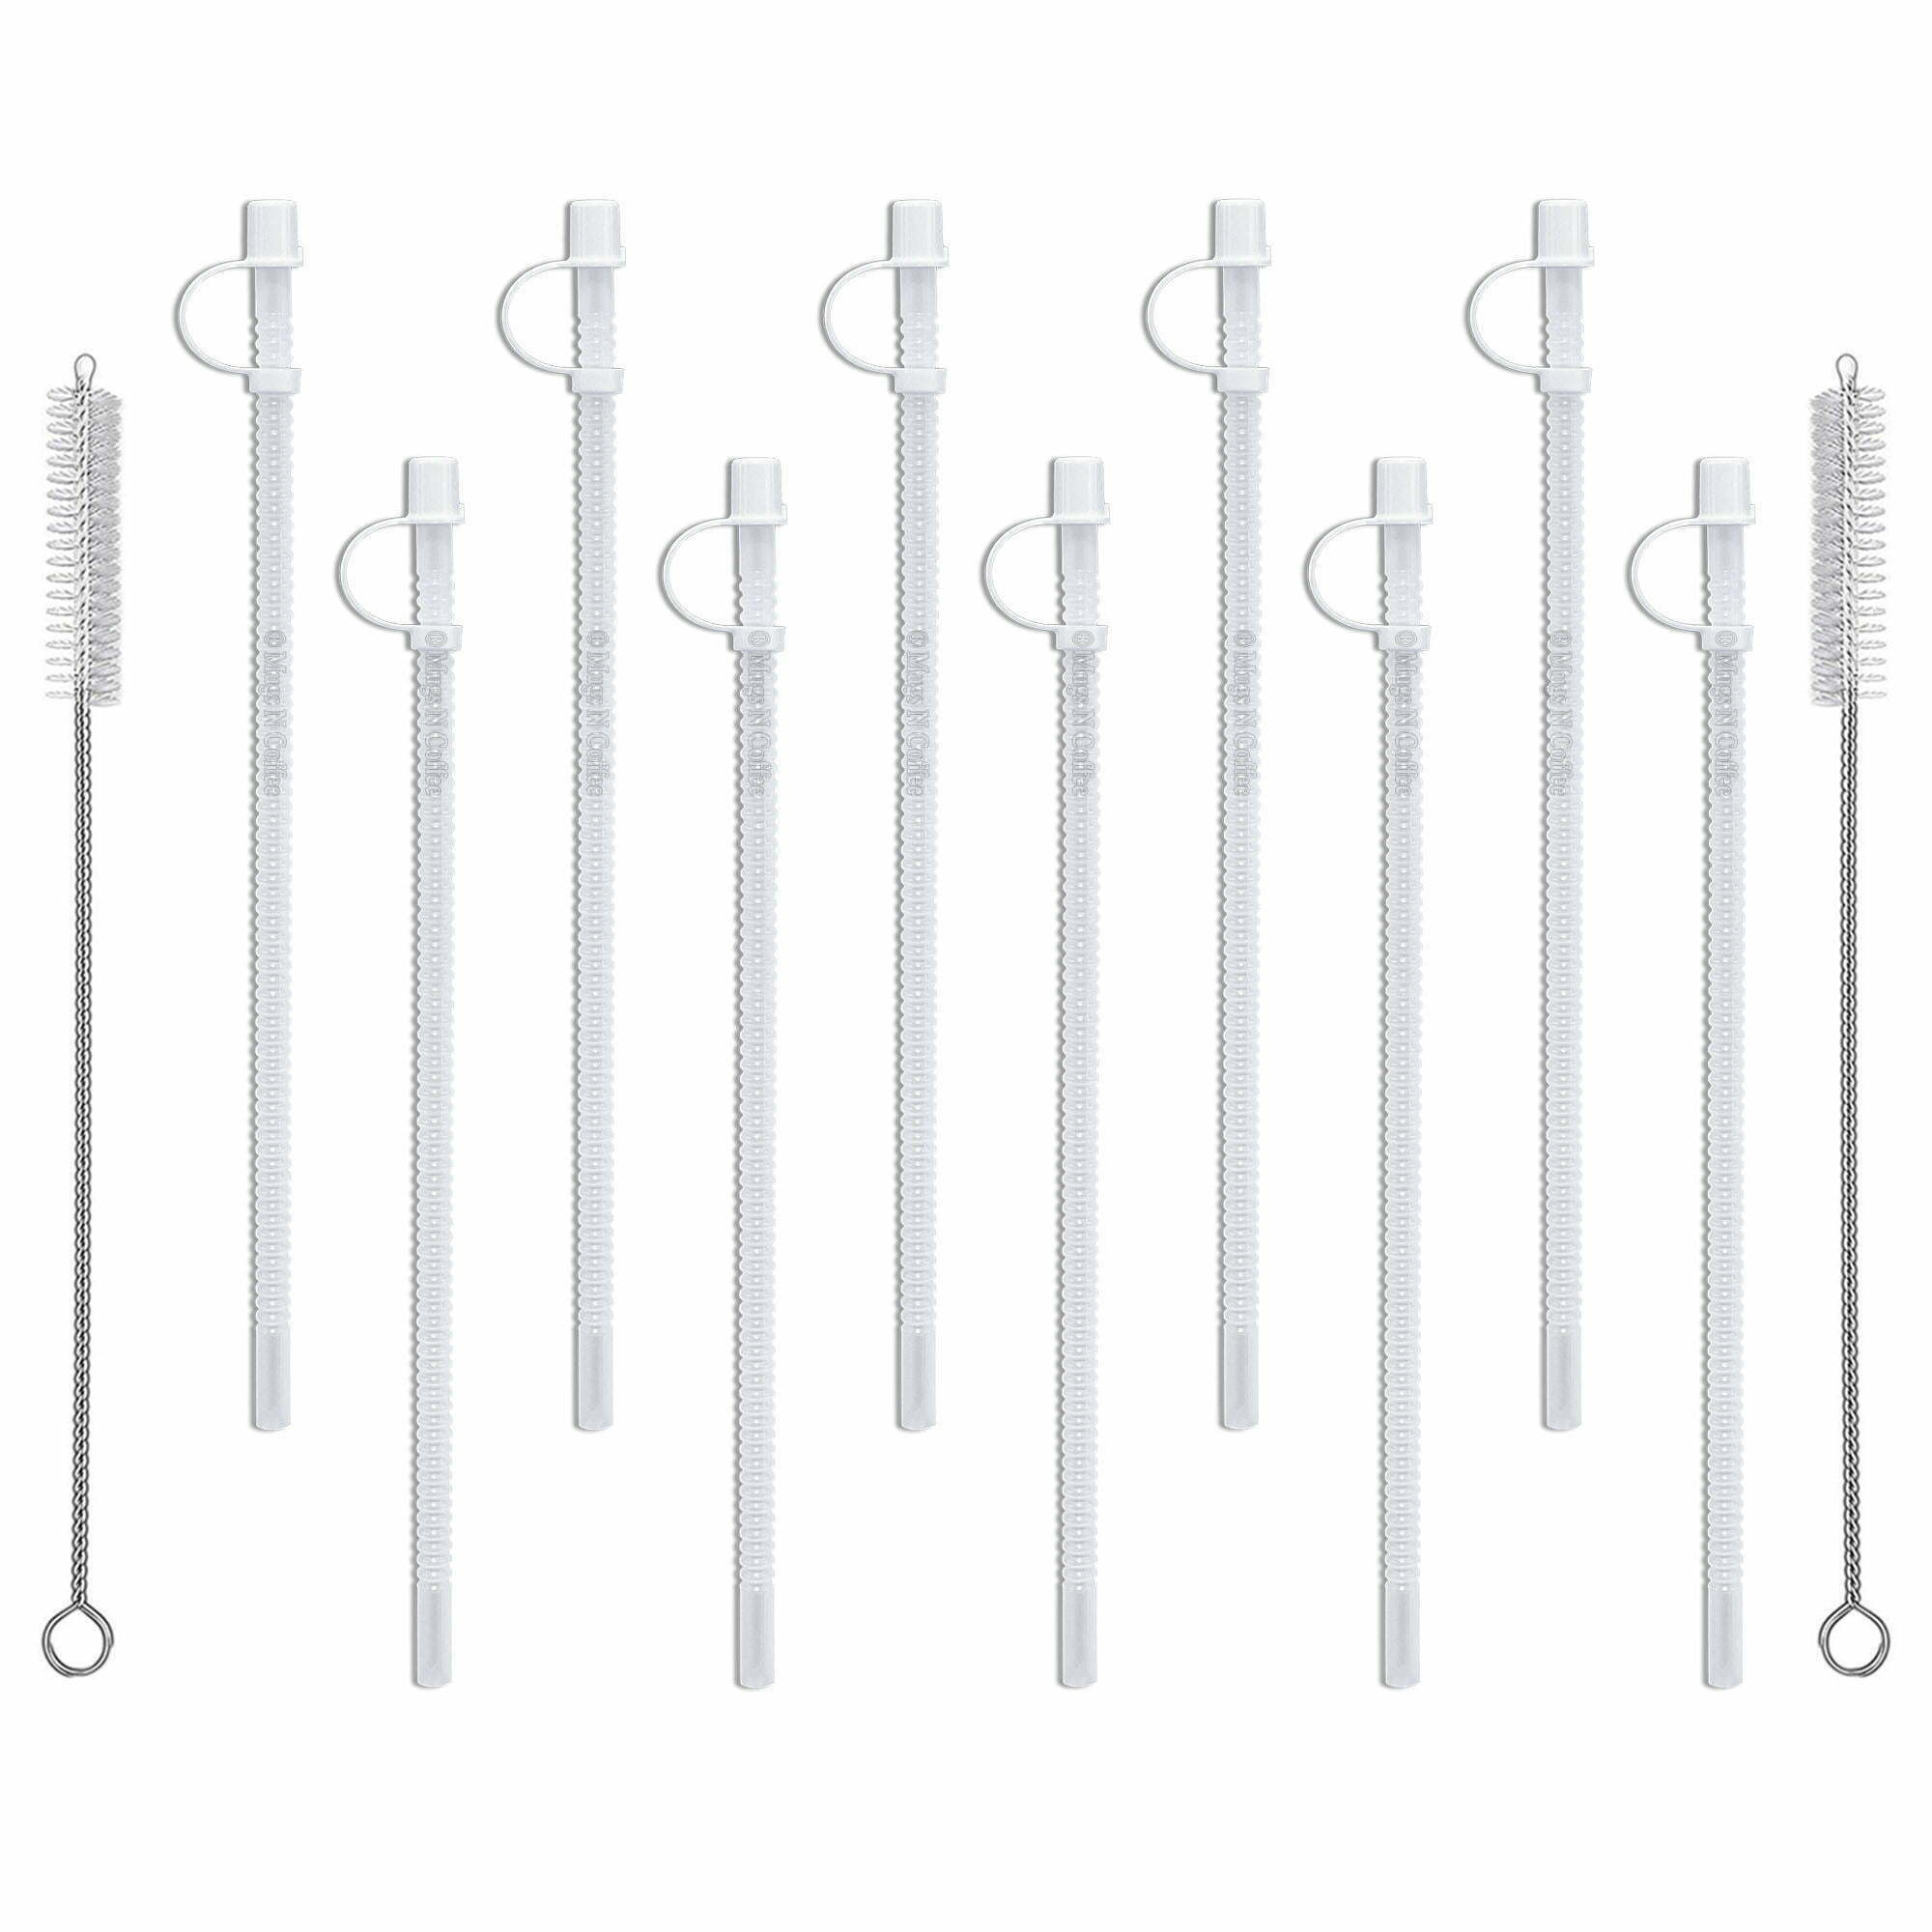 https://www.mugsncoffee.com/wp-content/uploads/2022/03/11-inch-Flexible-Straws-for-Whirley-Hospital-Mugs-10-pack-Includes-2-Straw-Brushes-1.jpg